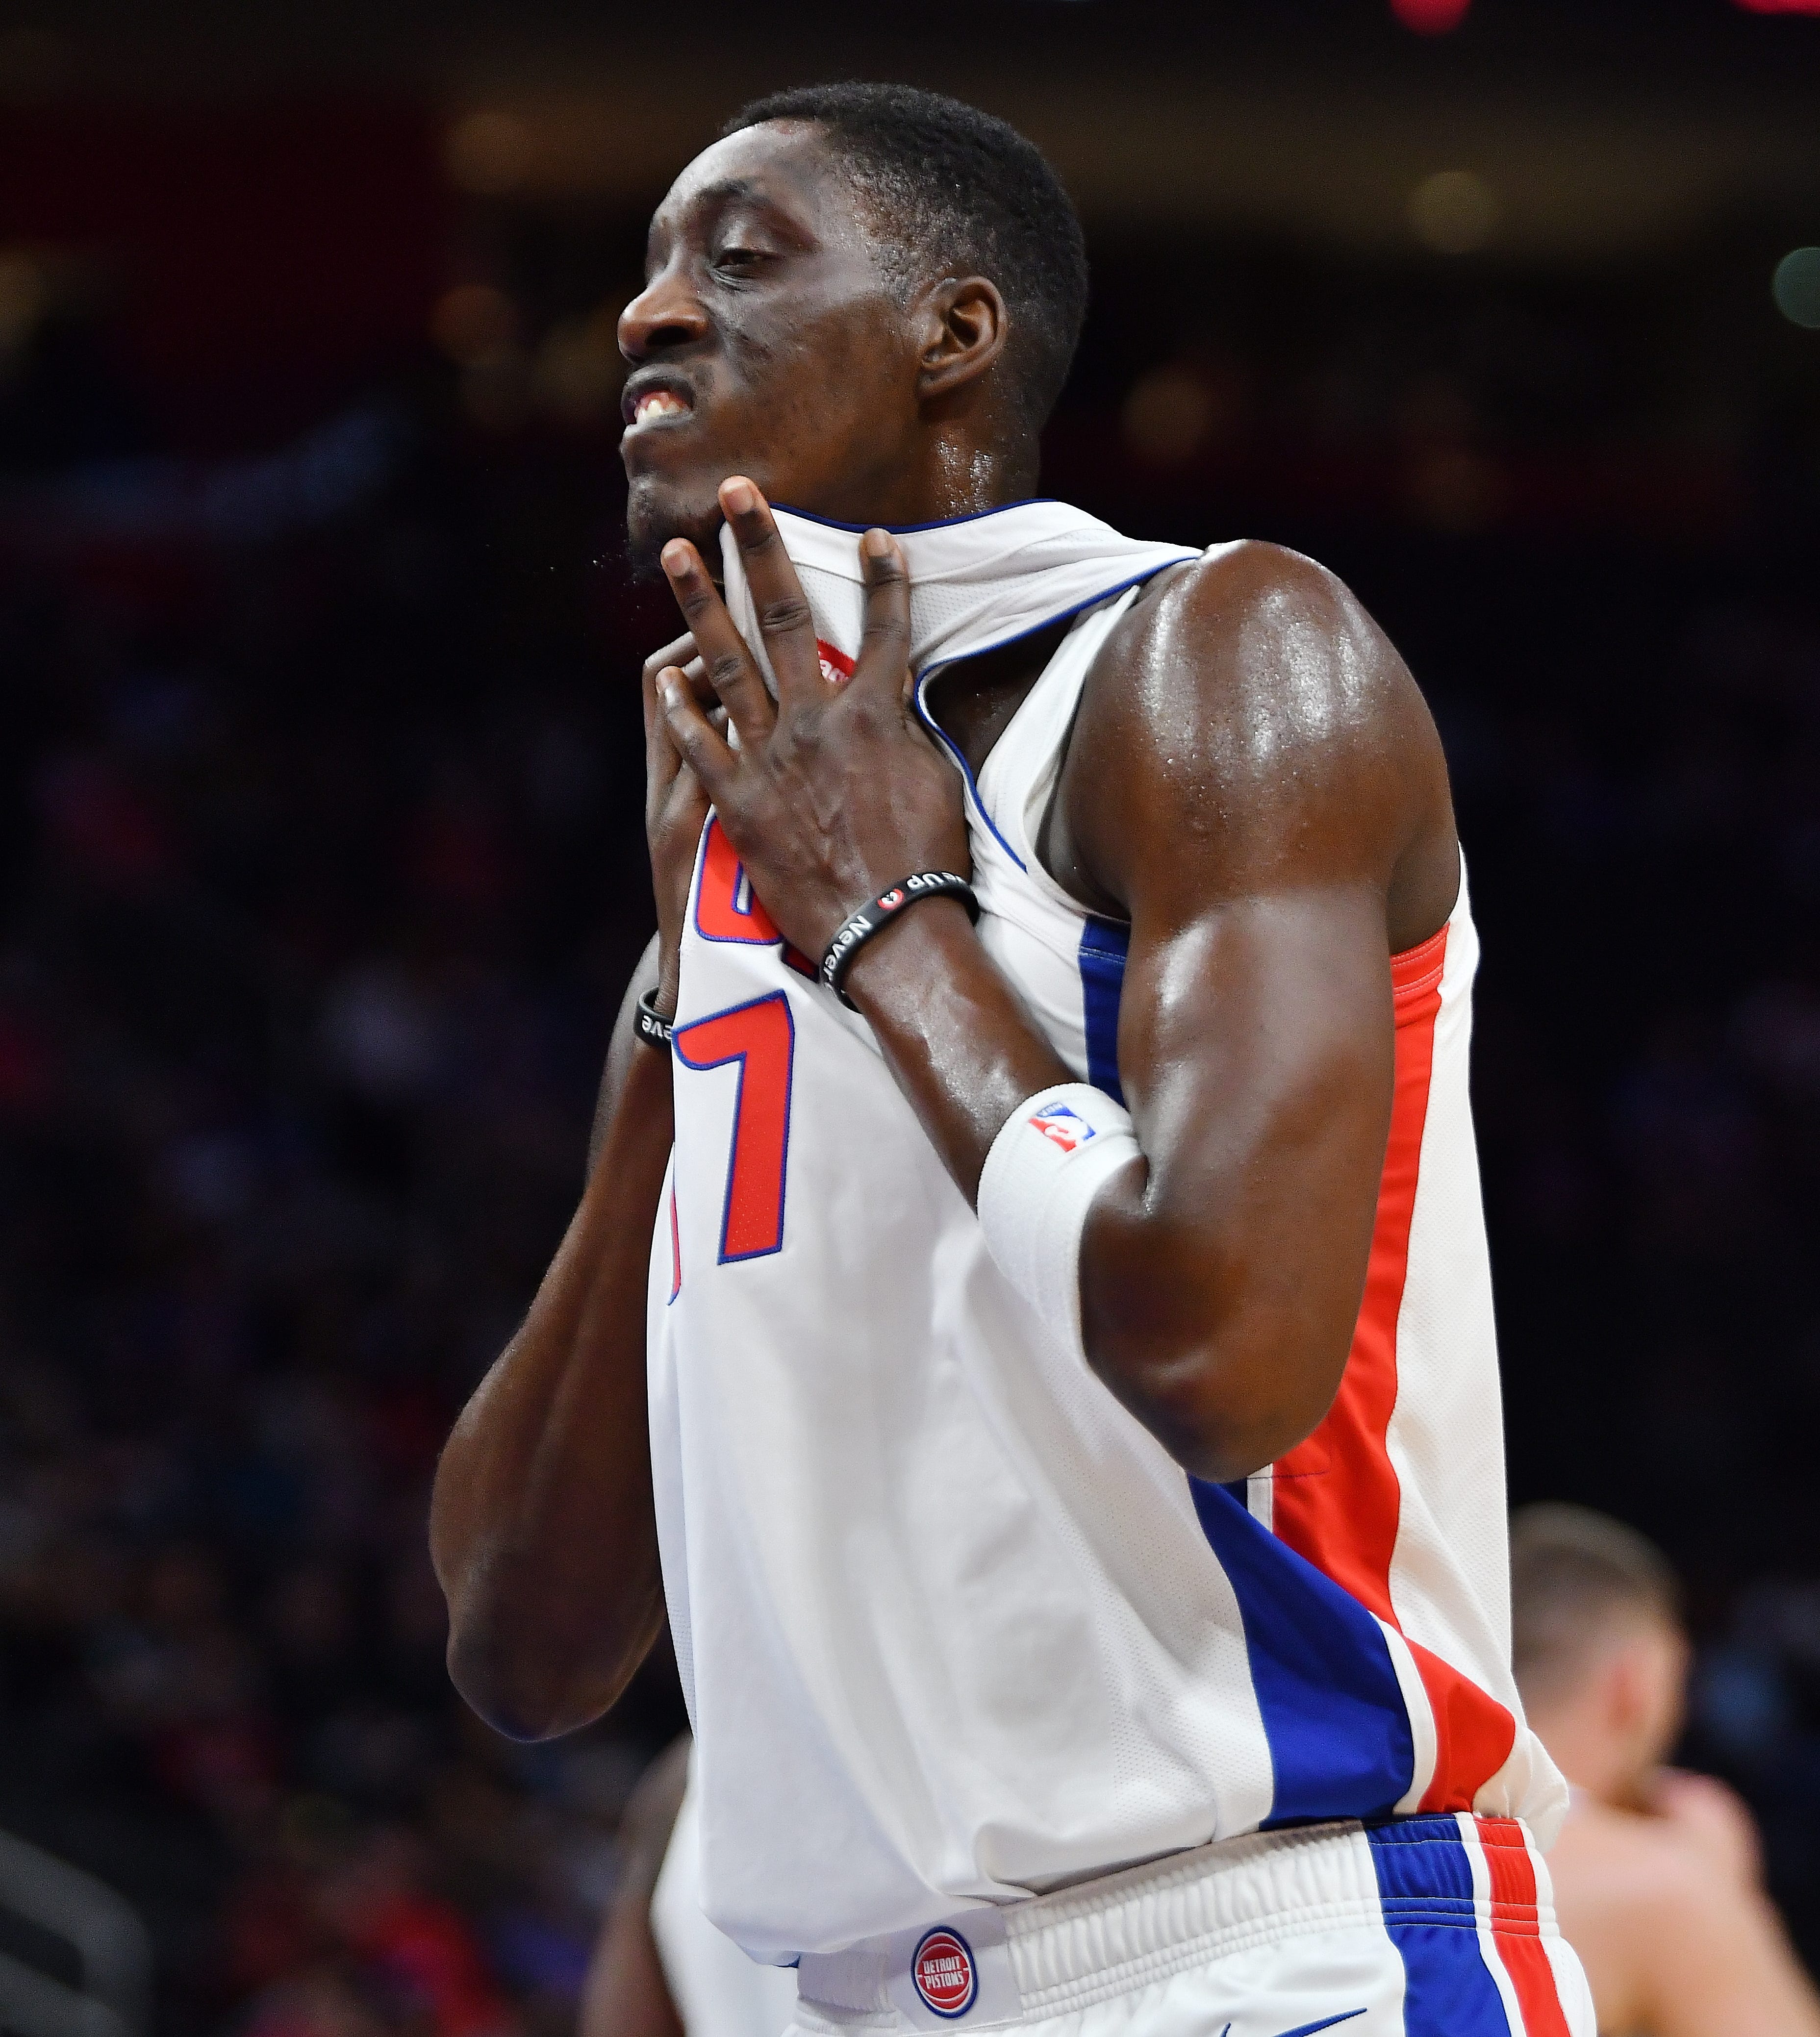 Tony Snell: Age: 27. Ht: 6-7. Wt: 213. 2018-19 stats: 6 pts, 2.1 rebs, 40% 3FG. Outlook: He ’ ll step into the starting lineup as an adept 3-point shooter and solid defender and bring some stability to a position that ’ s been a revolving door for a couple years. He ’ s been active and ready to shoot in the preseason, which bodes well.